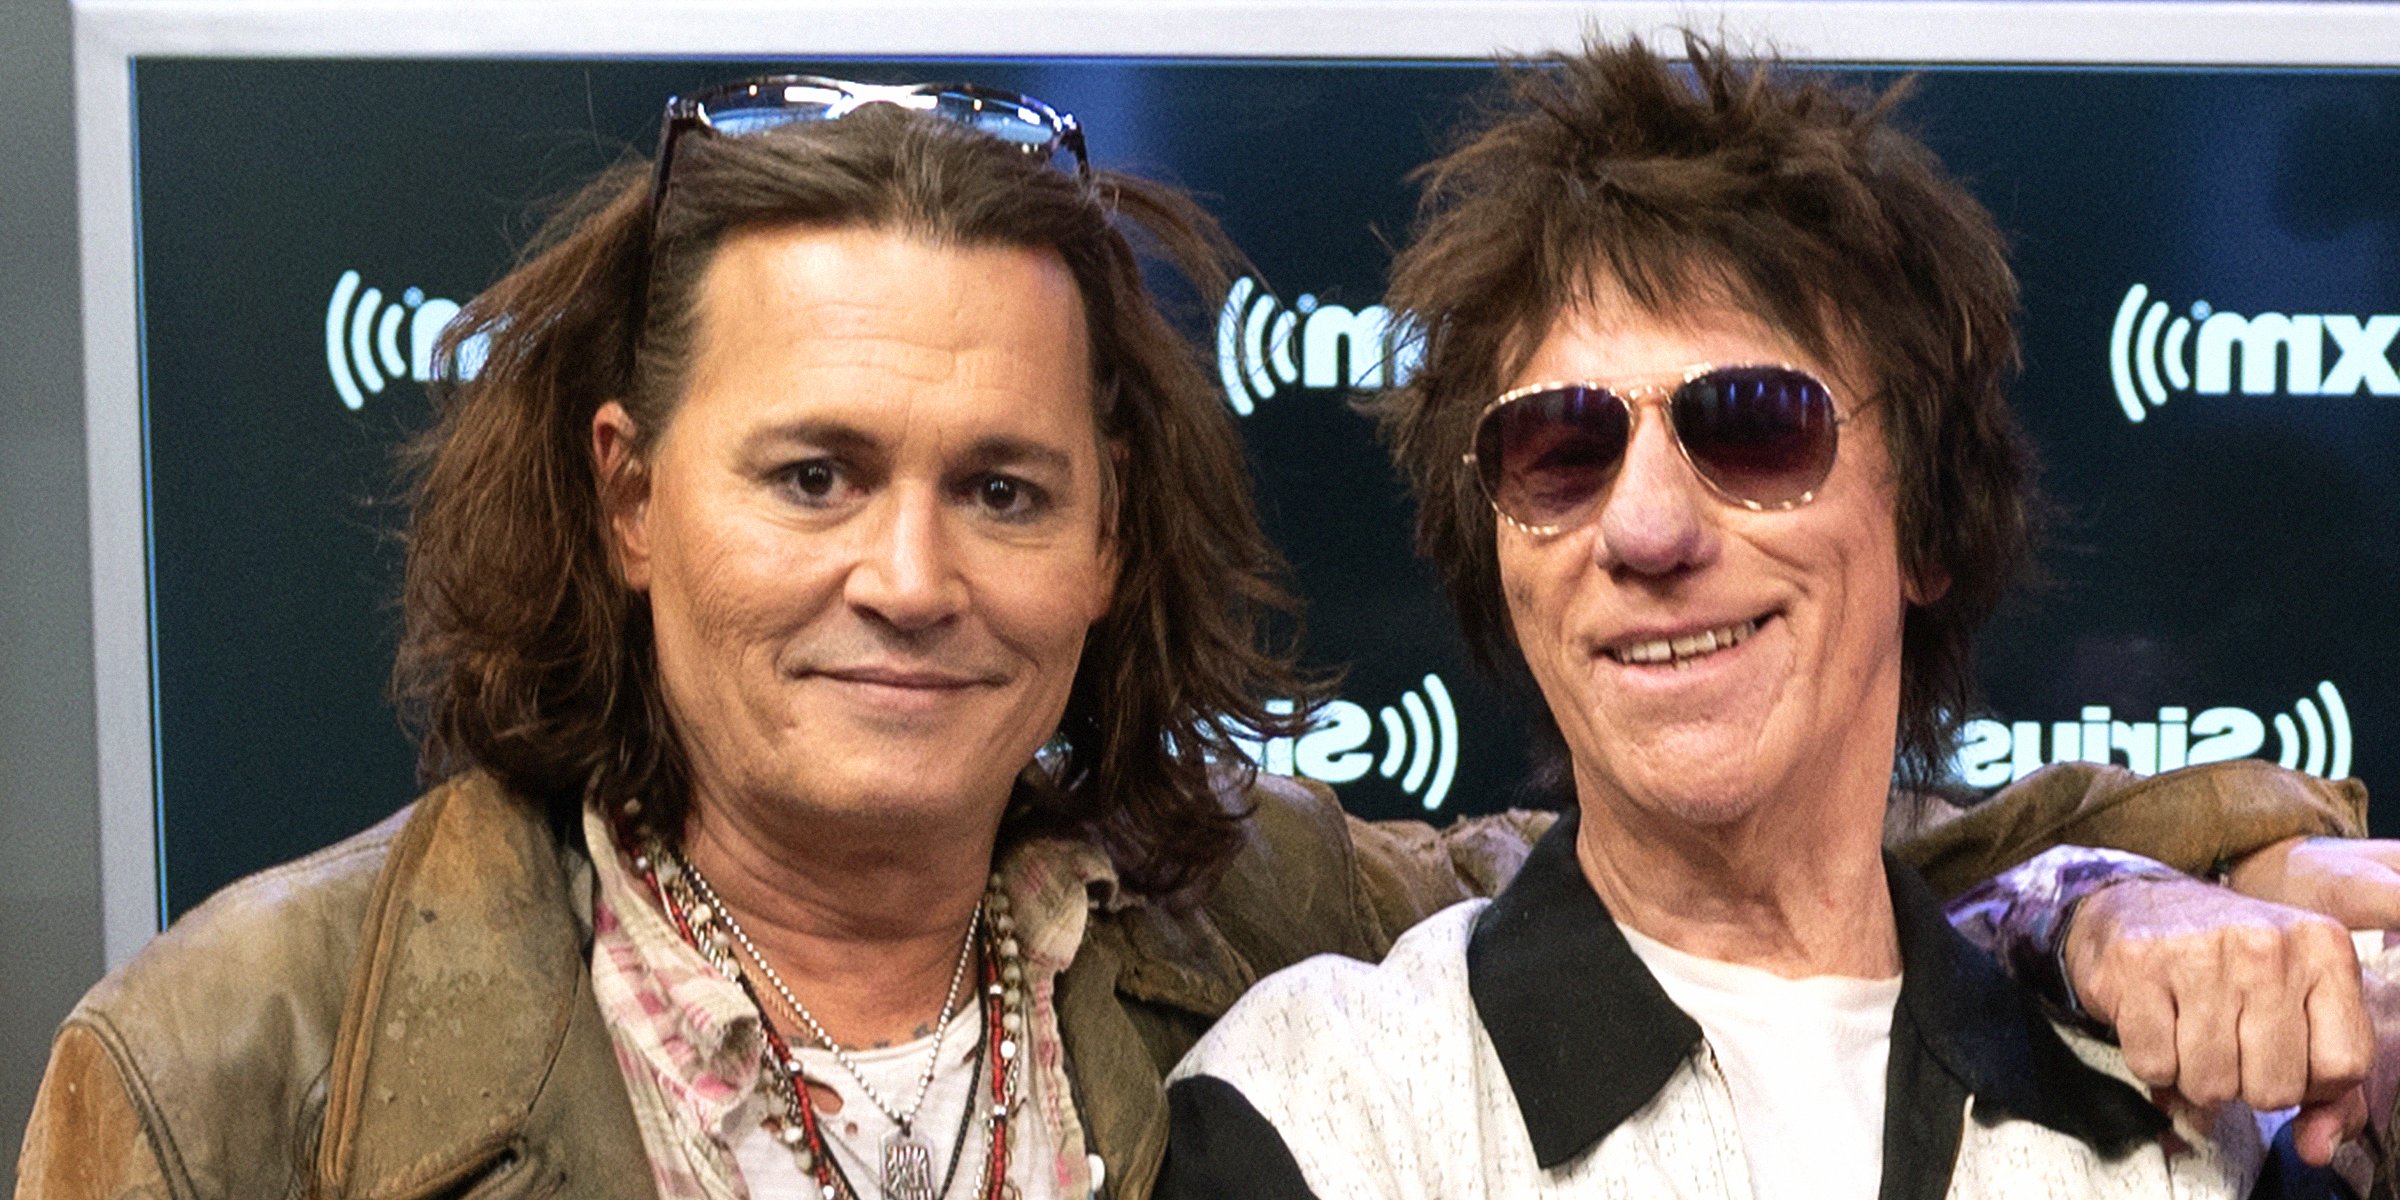 Jonny Depp and Jeff Beck | Source: Getty Images